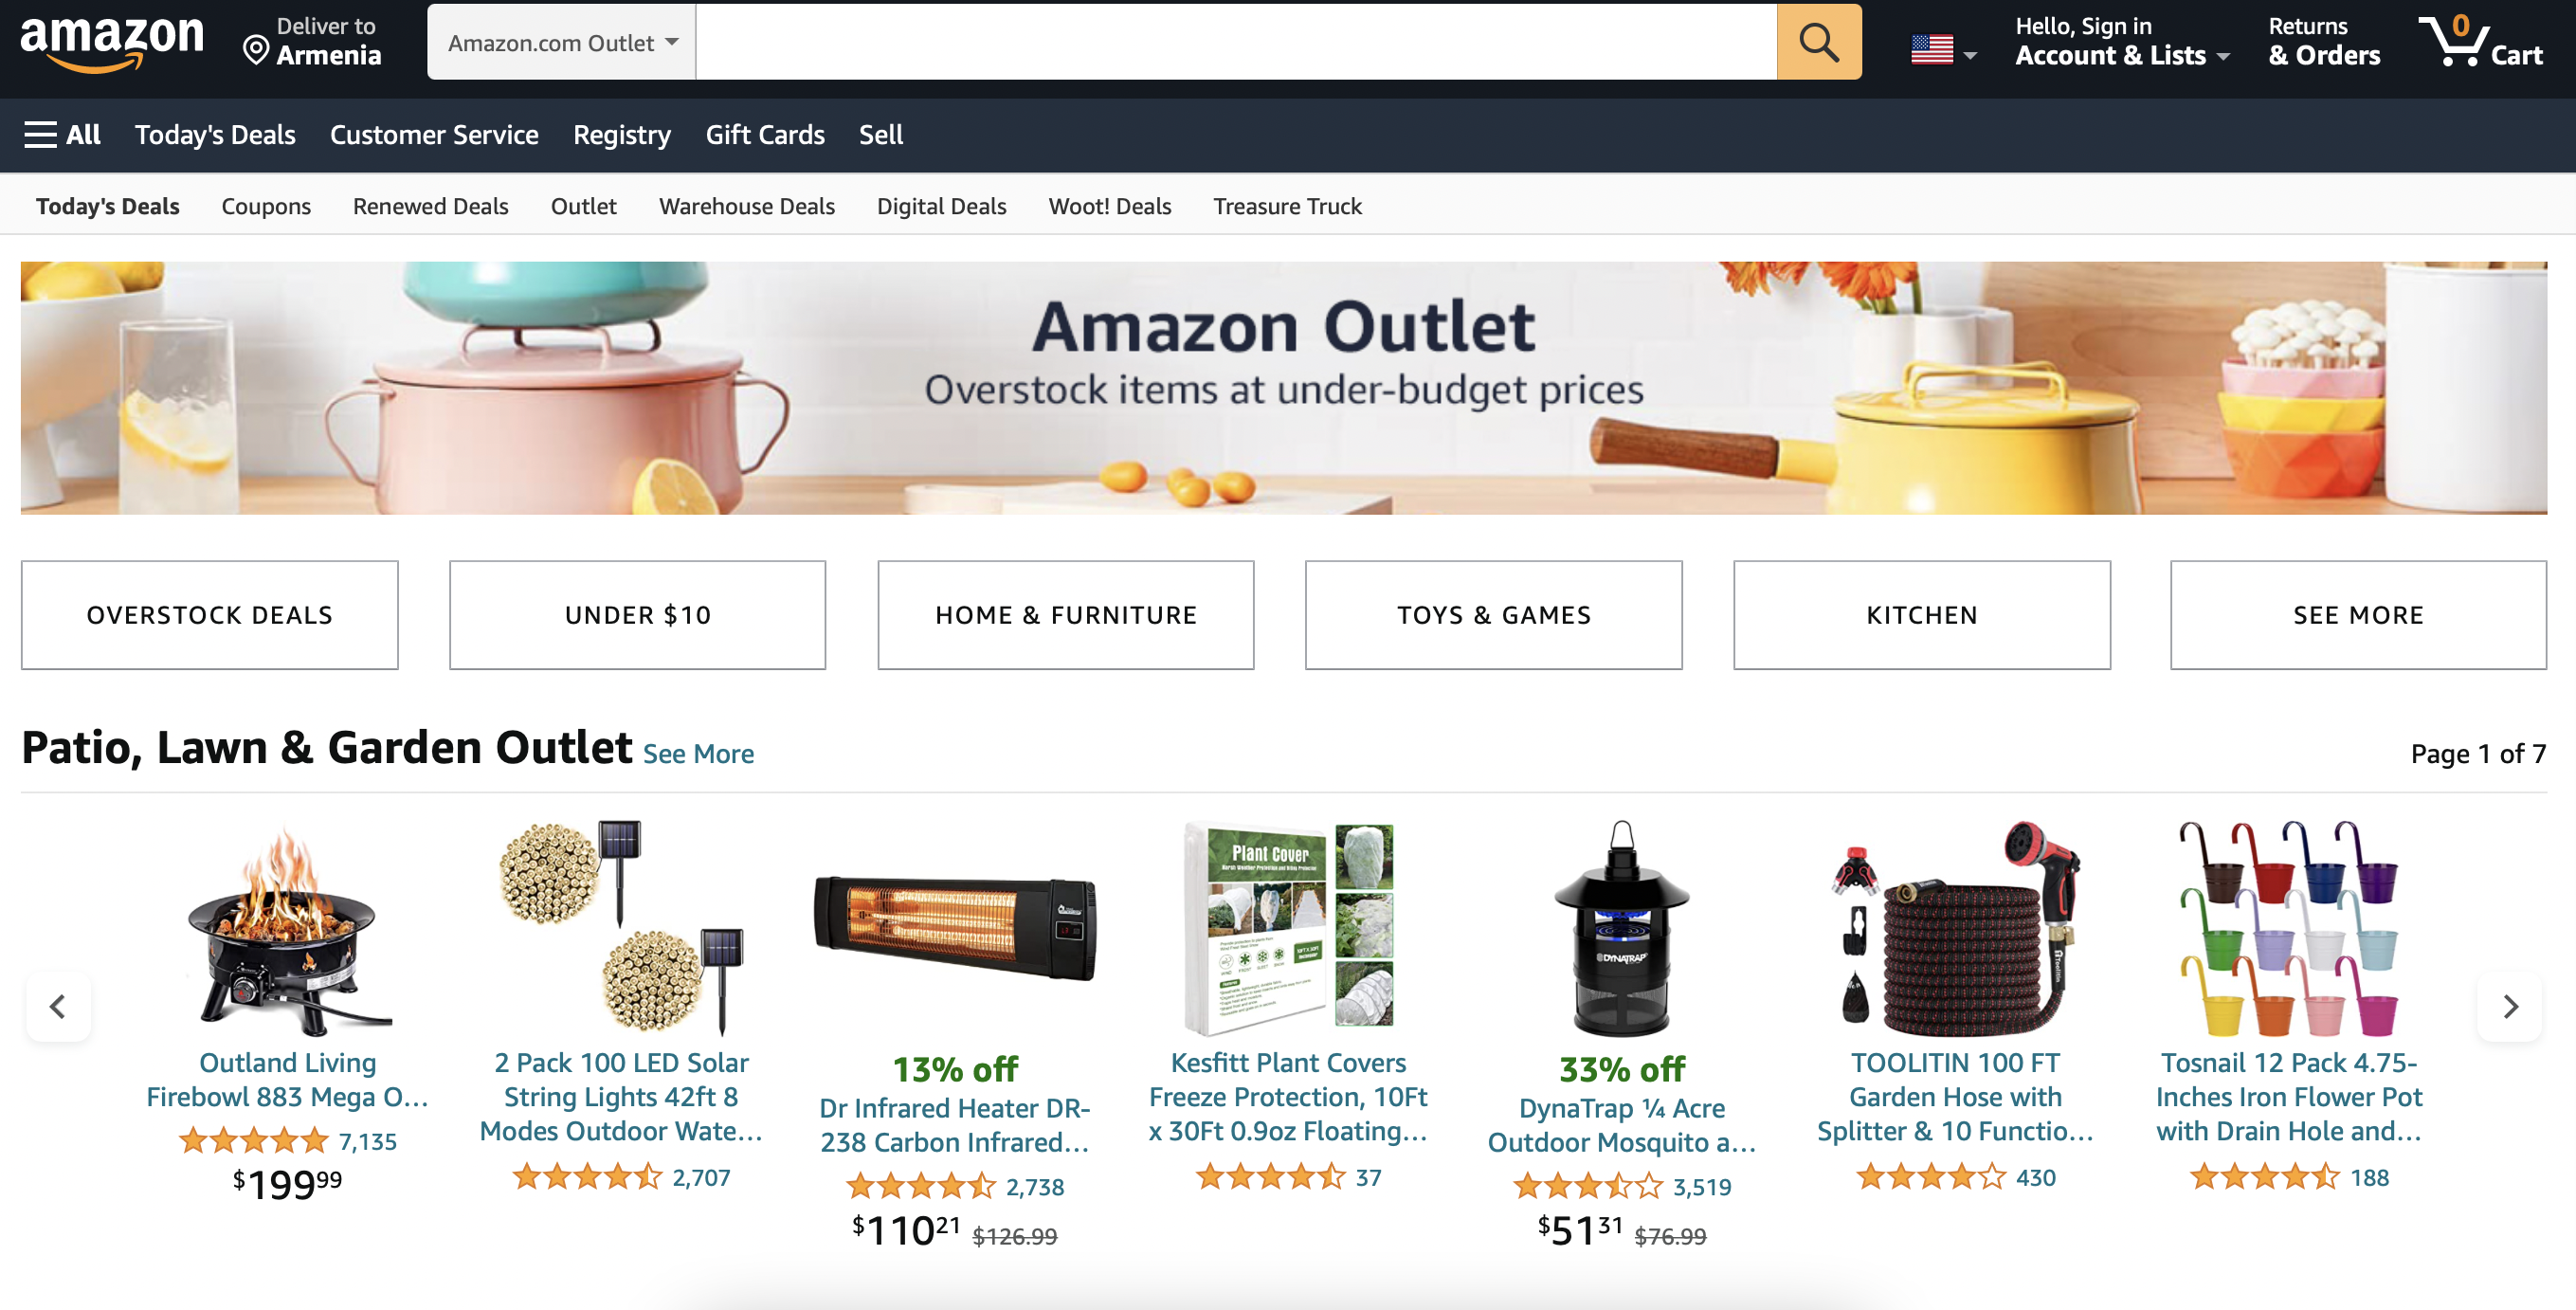 What is Amazon Outlet and how does it work?